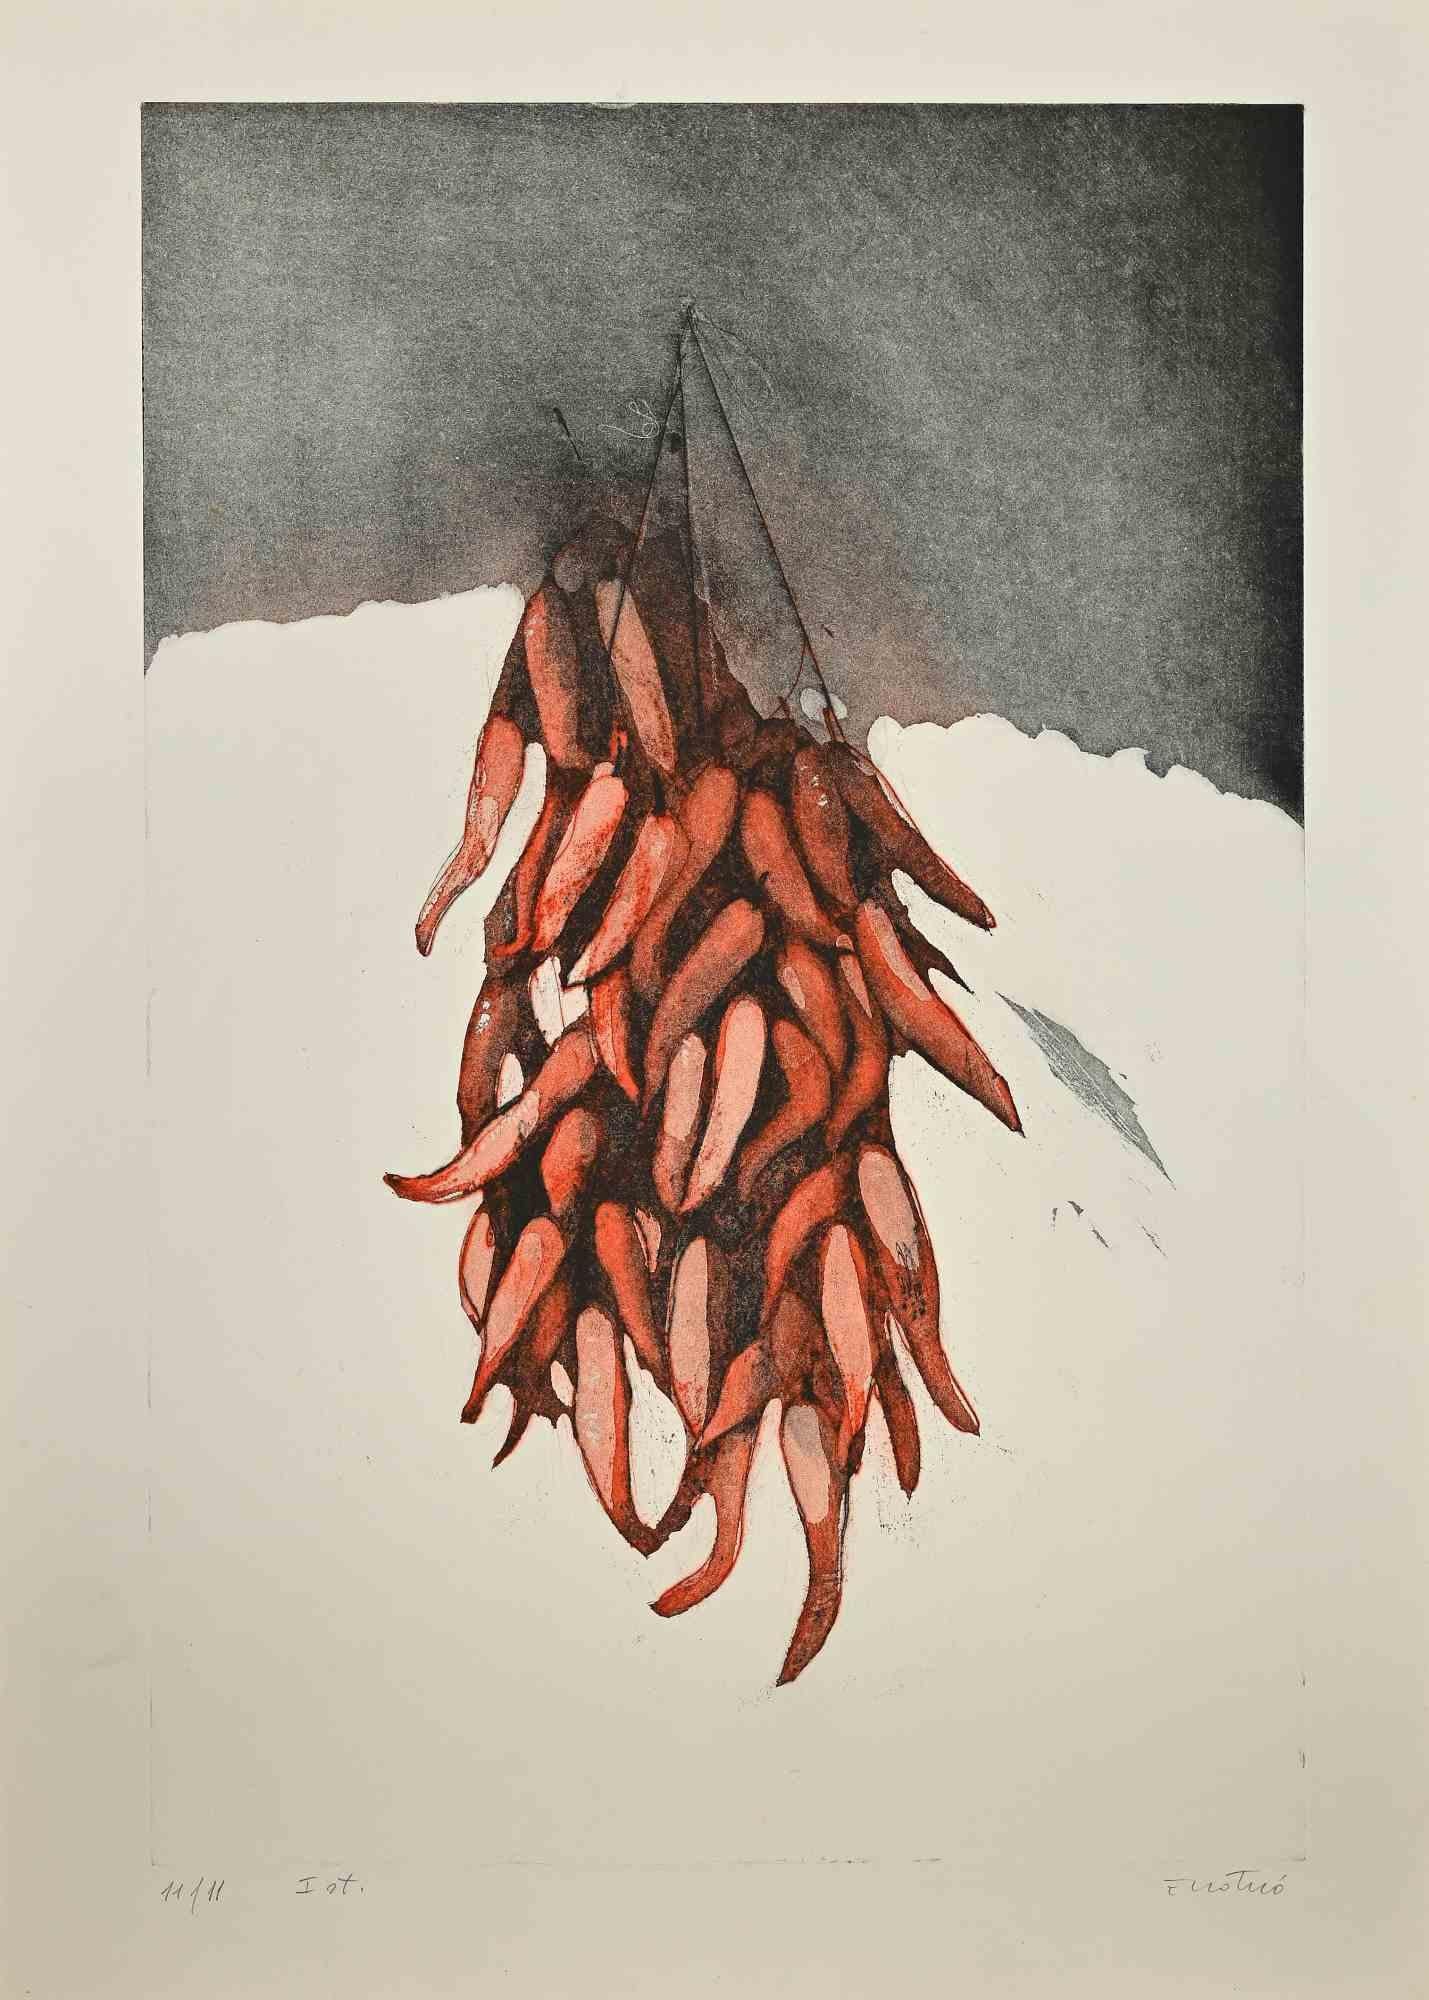 Still Life with Red Peppers is an Etching realized by Enotrio Pugliese in the 1960s.

Hand-signed by the artist on the lower.

Numbered, Limited edition of 11/11prints.

Good conditions.

Enotrio Pugliese (May 11, 1920 - August 1989) was an Italian